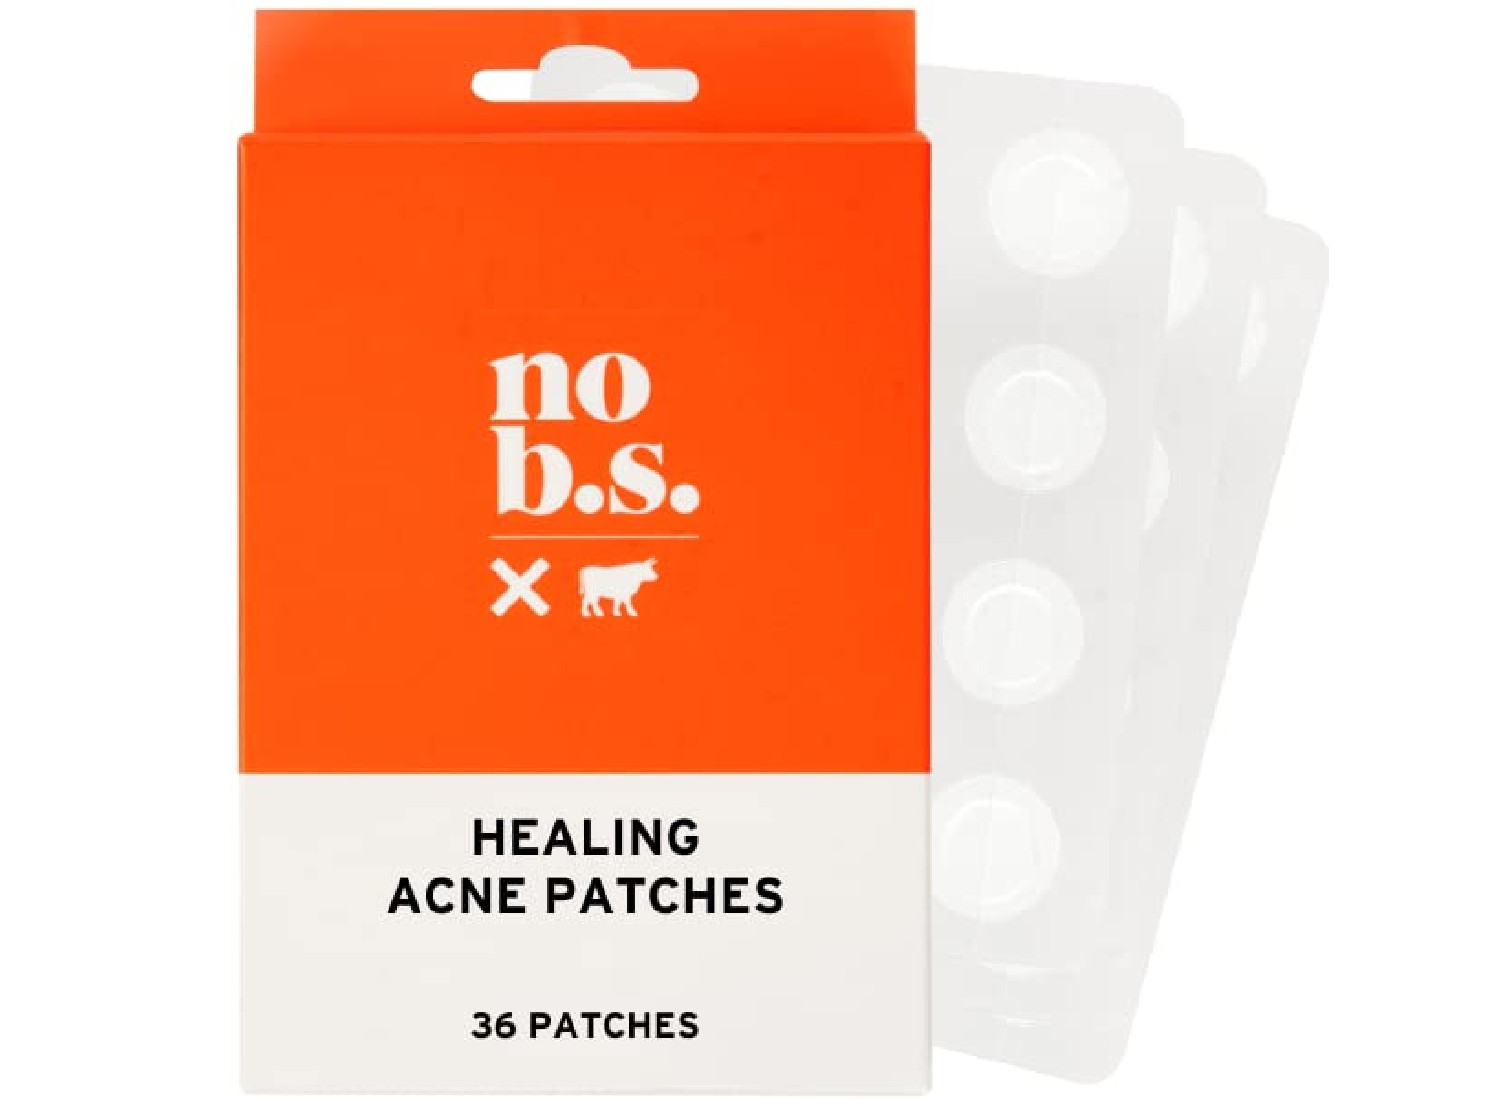 An orange pack of acne patches.